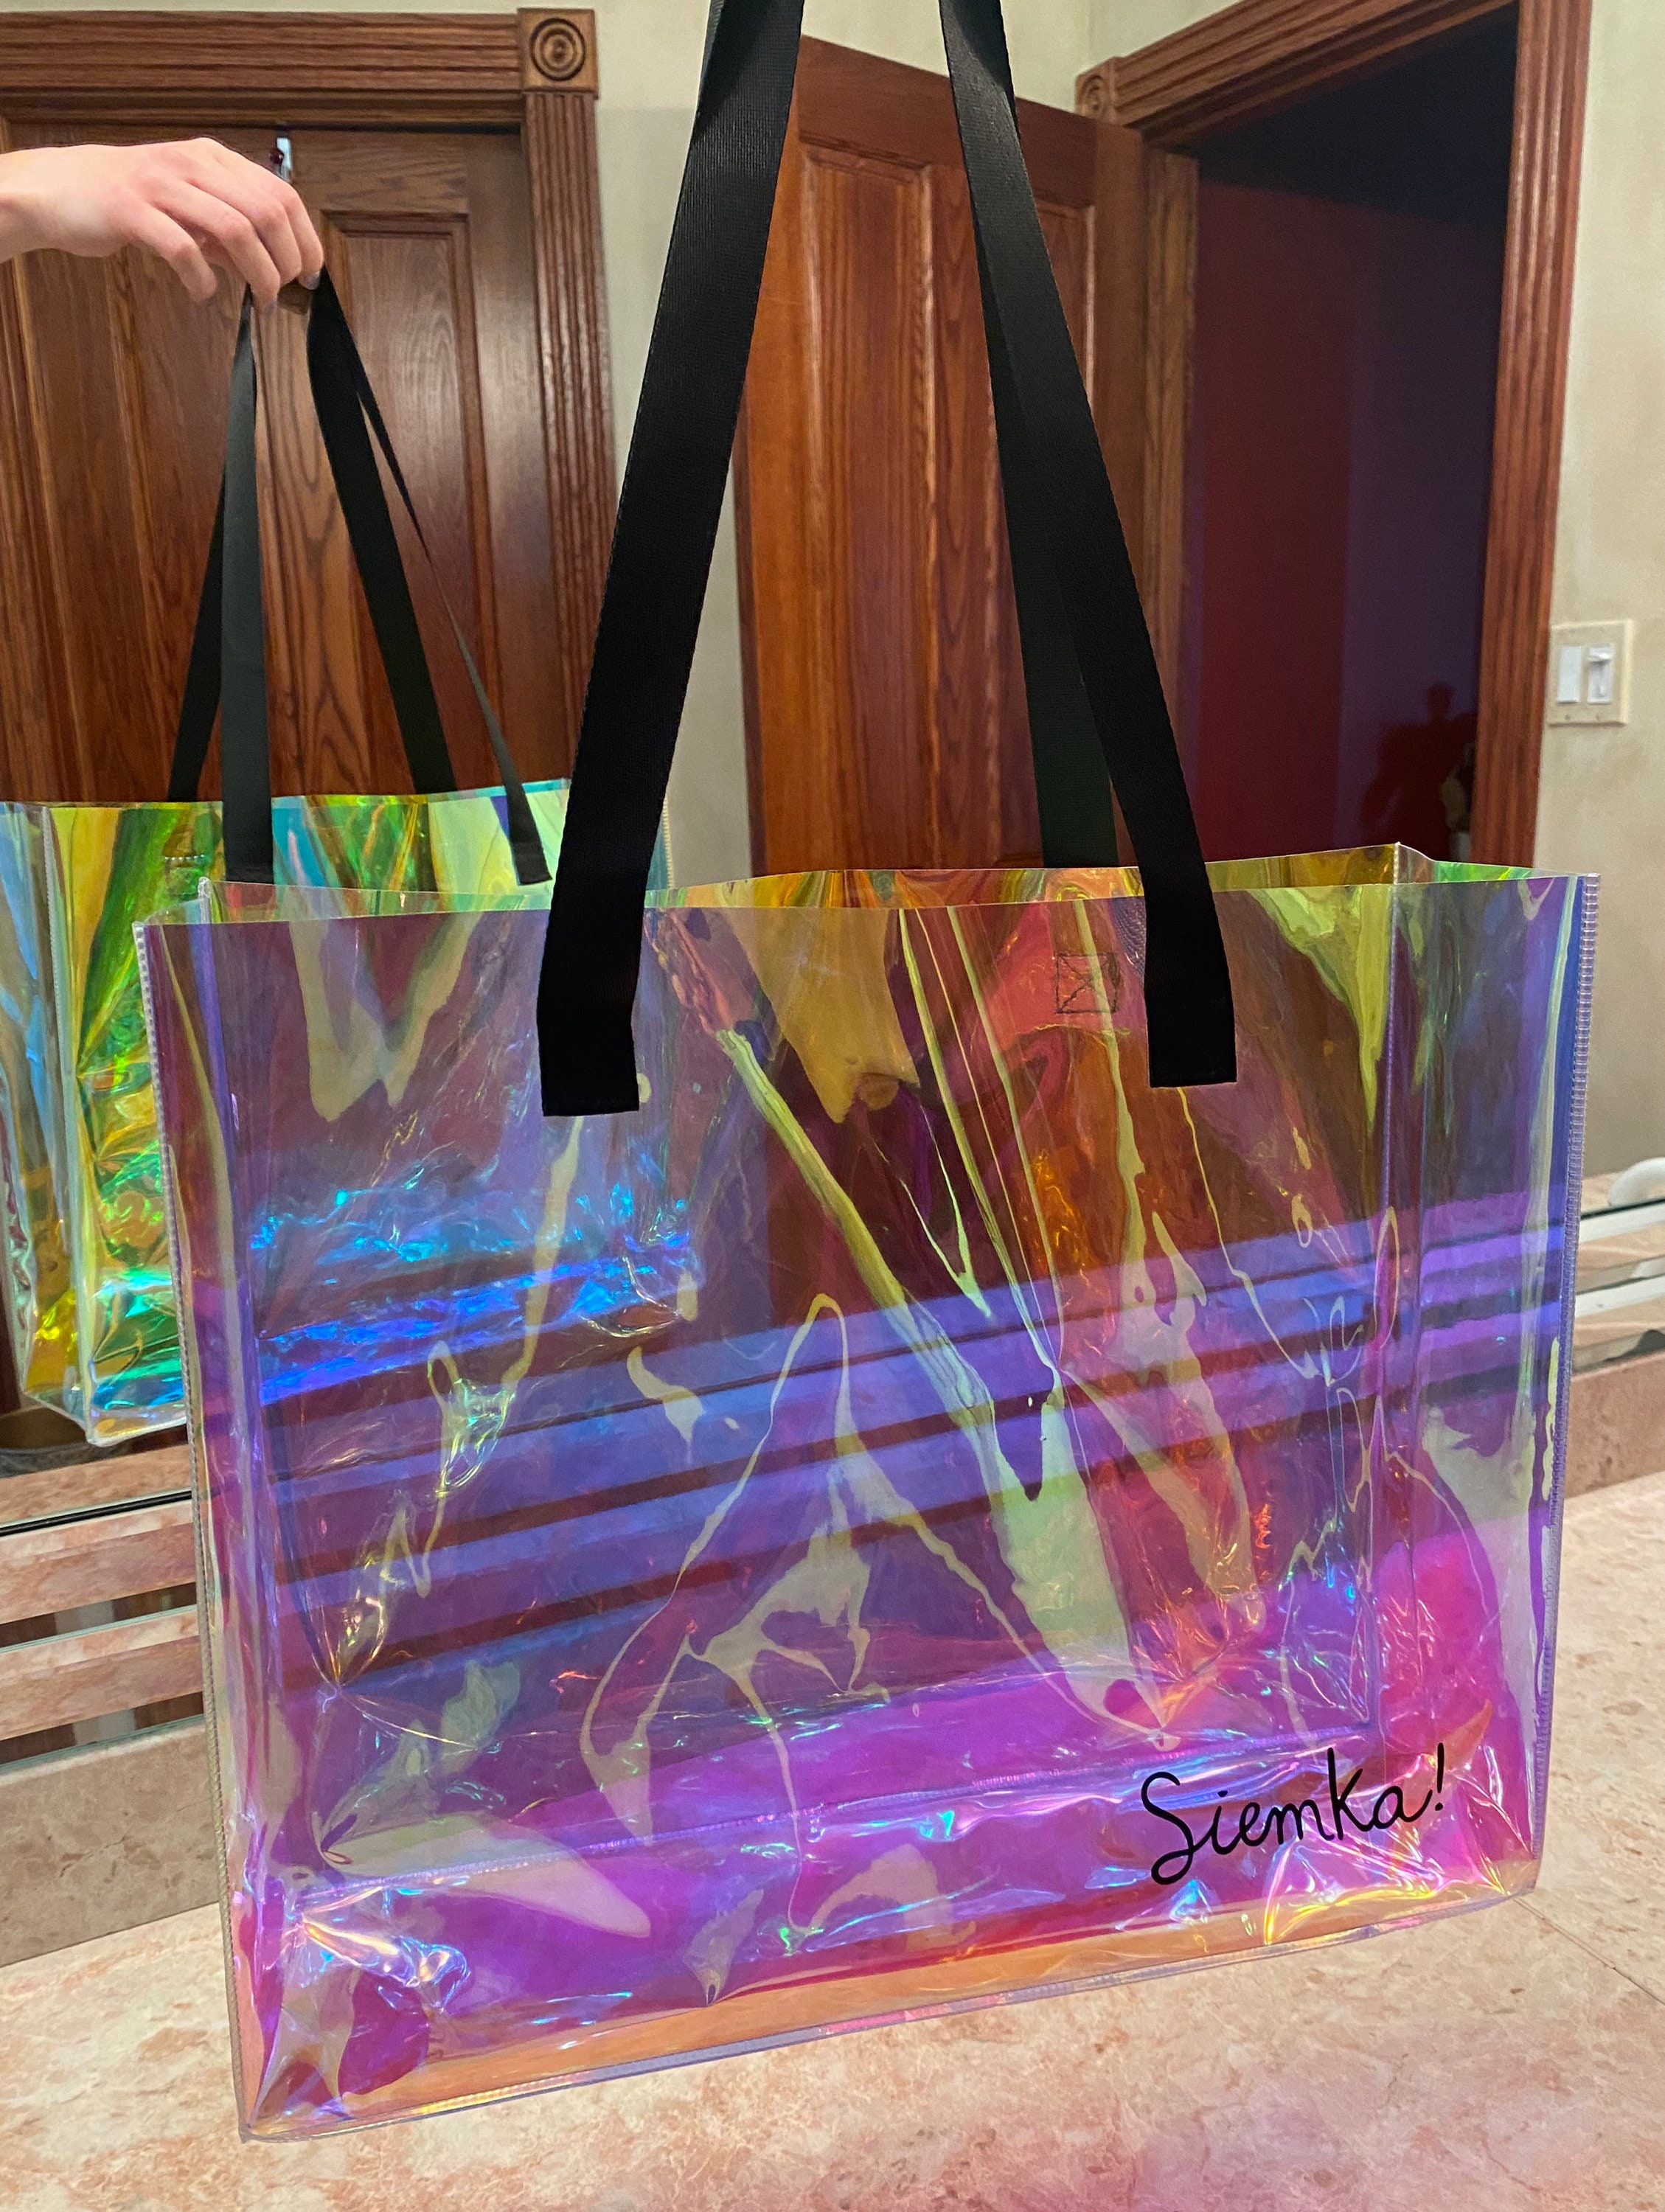 Teen Girls Clear Iridescent Tote Bag